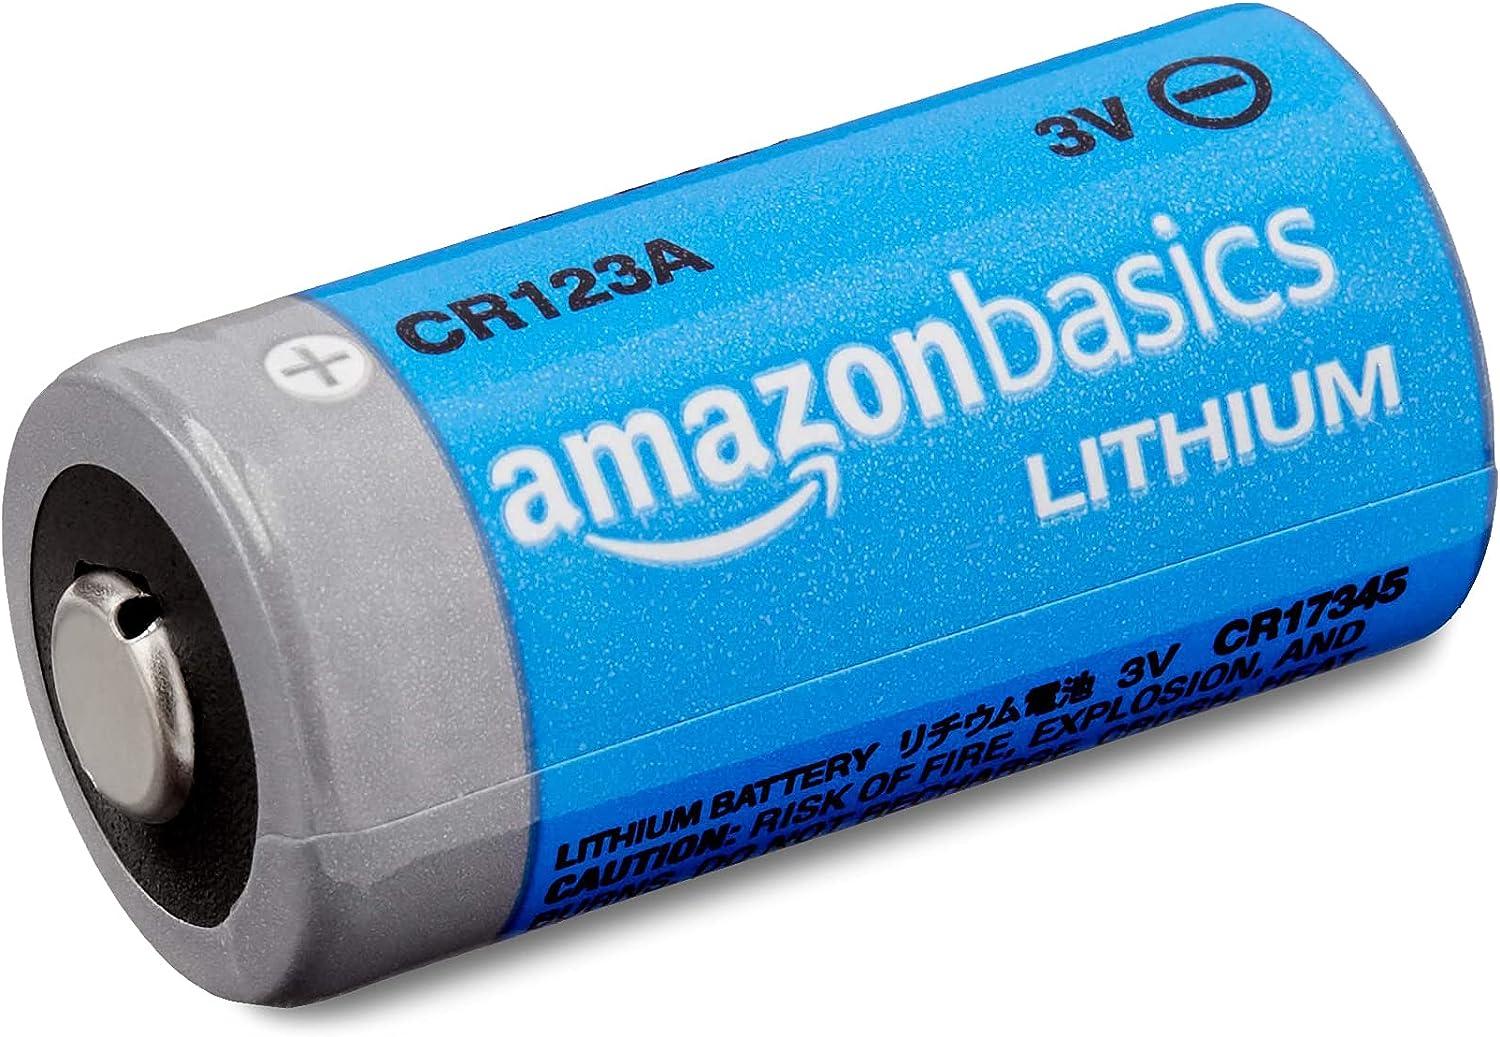 Panasonic CR123A Photo Power Lithium battery, All India Delivery